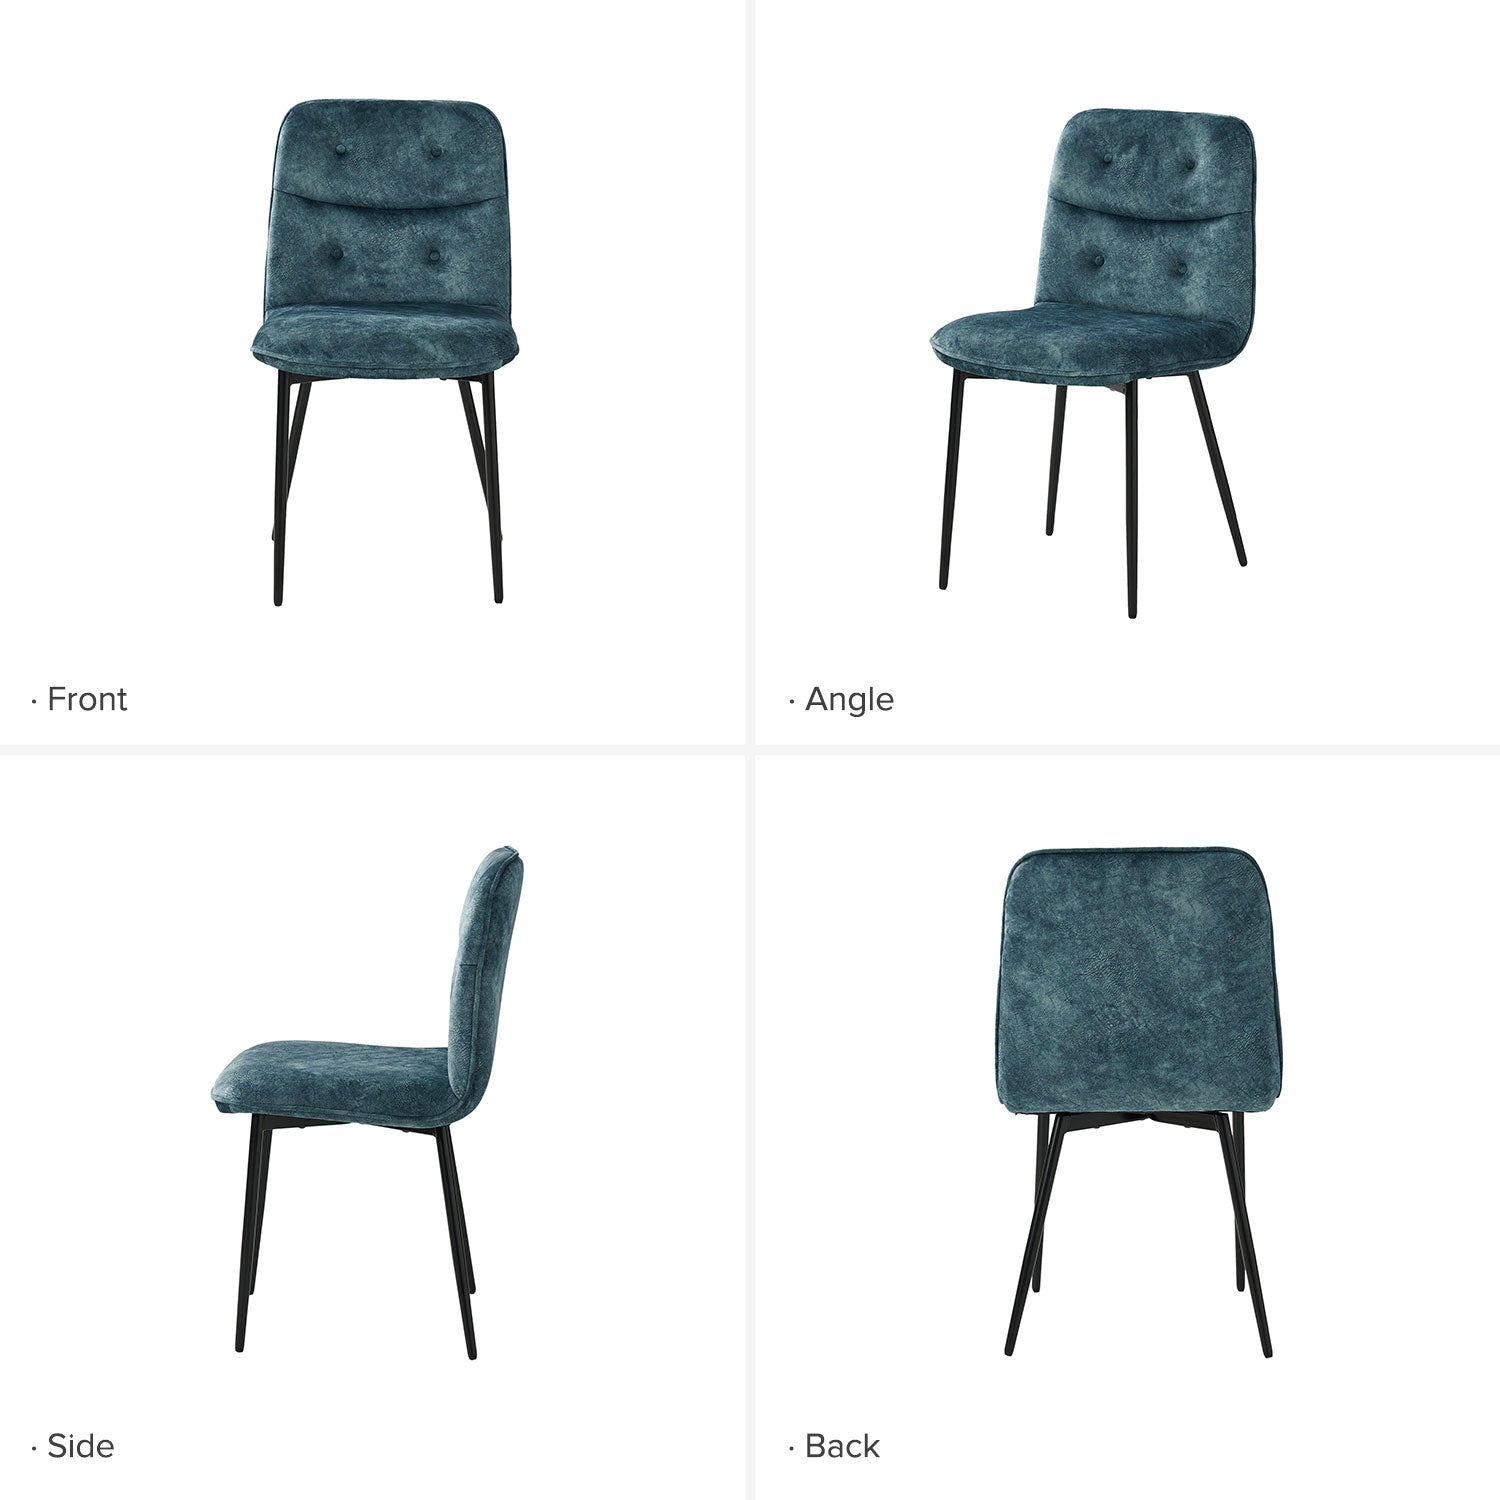 Annie Velvet Solid Back Dining Chair (Set of 4)